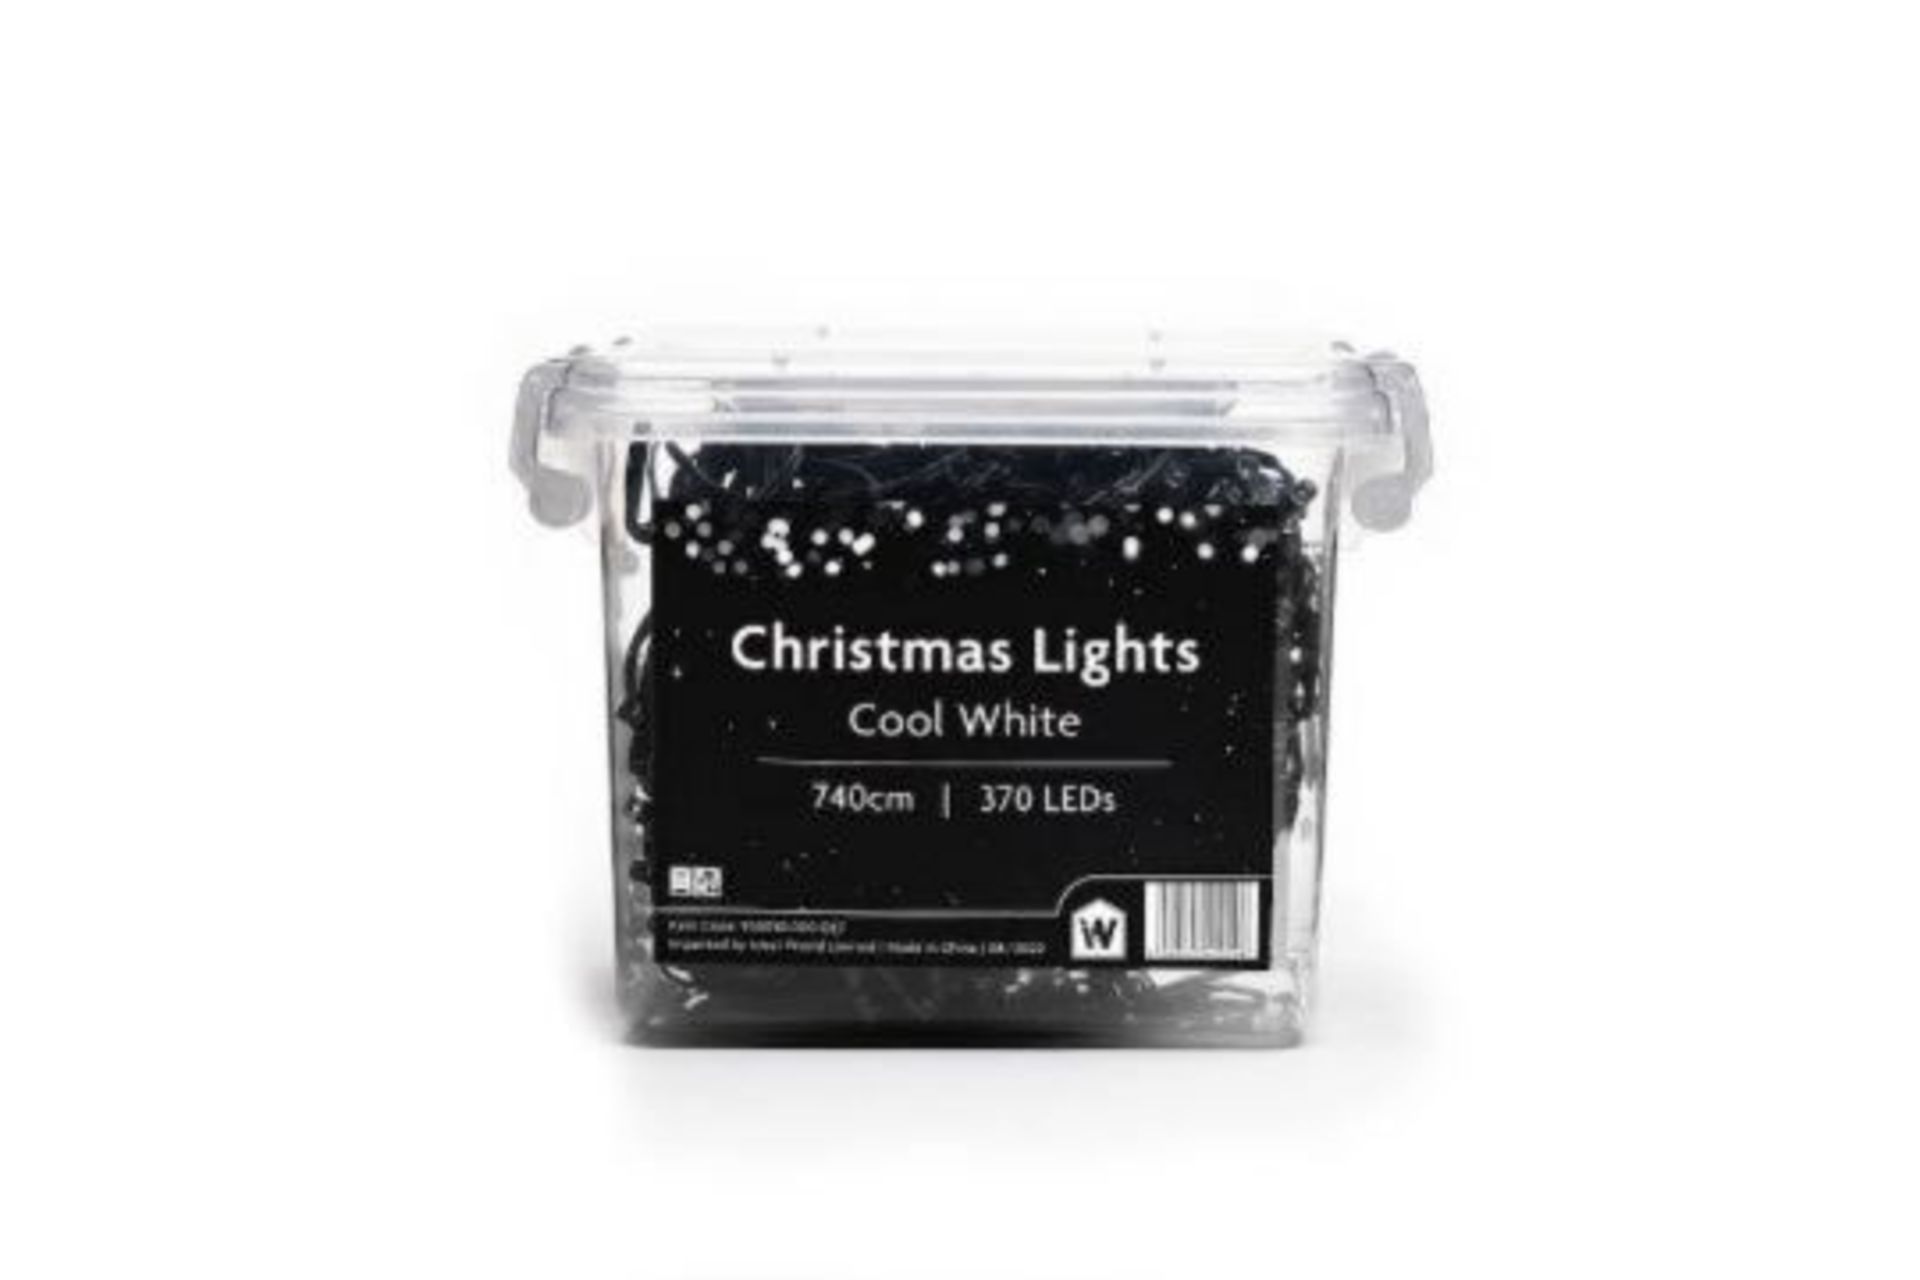 TRADE LOT 100 X BRAND NEW LUXURY WARM WHITE/COOL WHITE 740CM 370 LED CHRISTMAS LIGHTS (950050) - Image 2 of 2